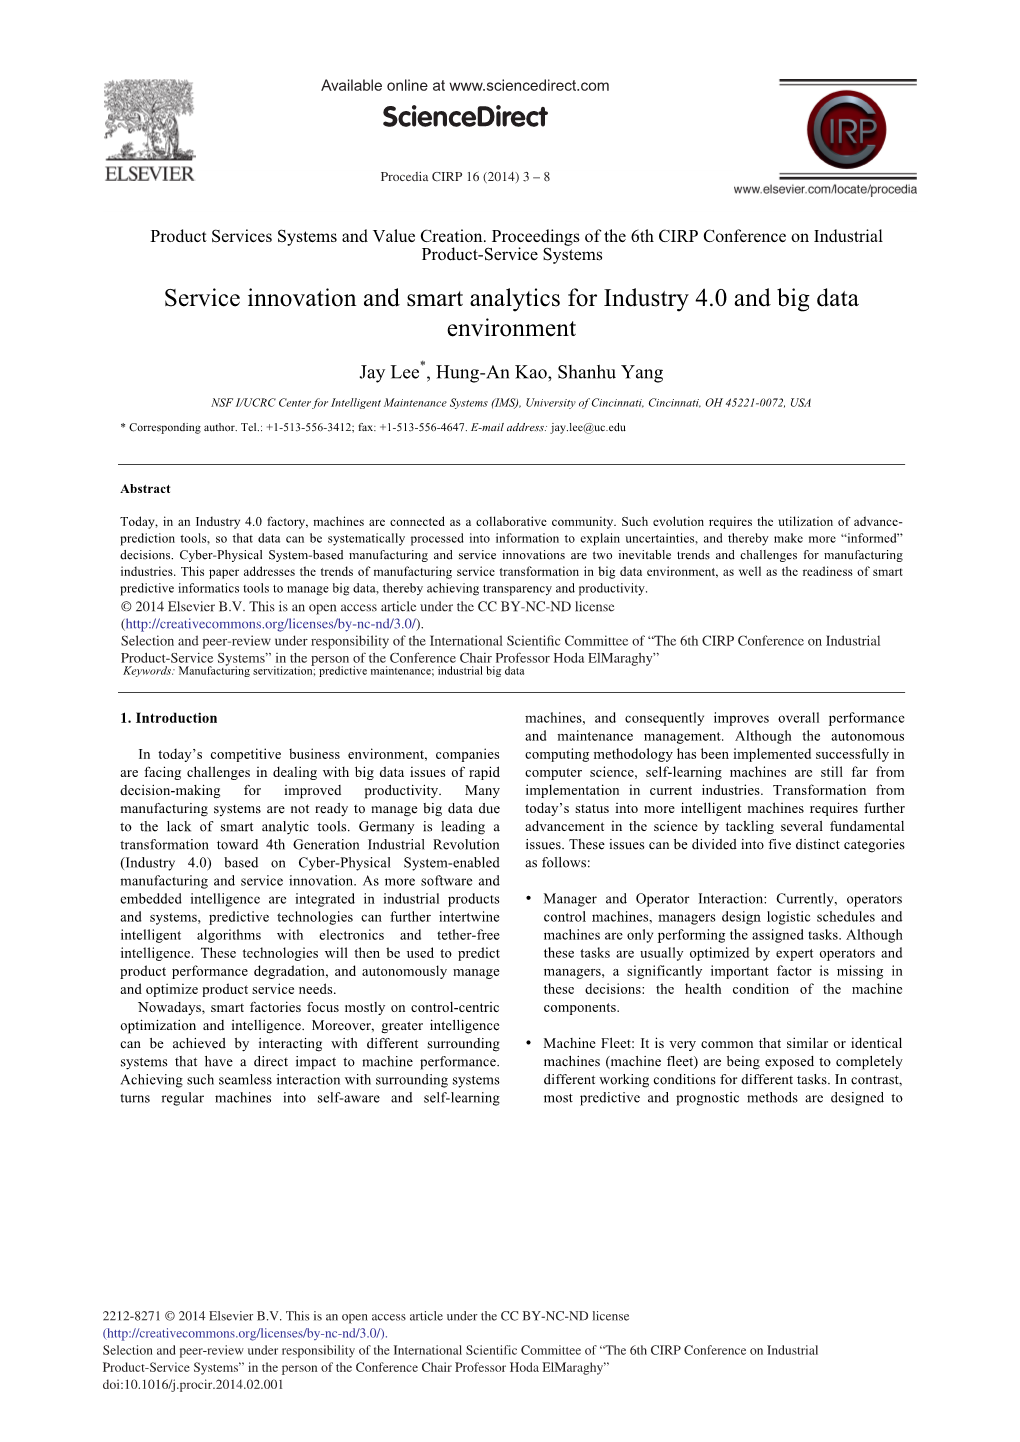 Service Innovation and Smart Analytics for Industry 4.0 and Big Data Environment